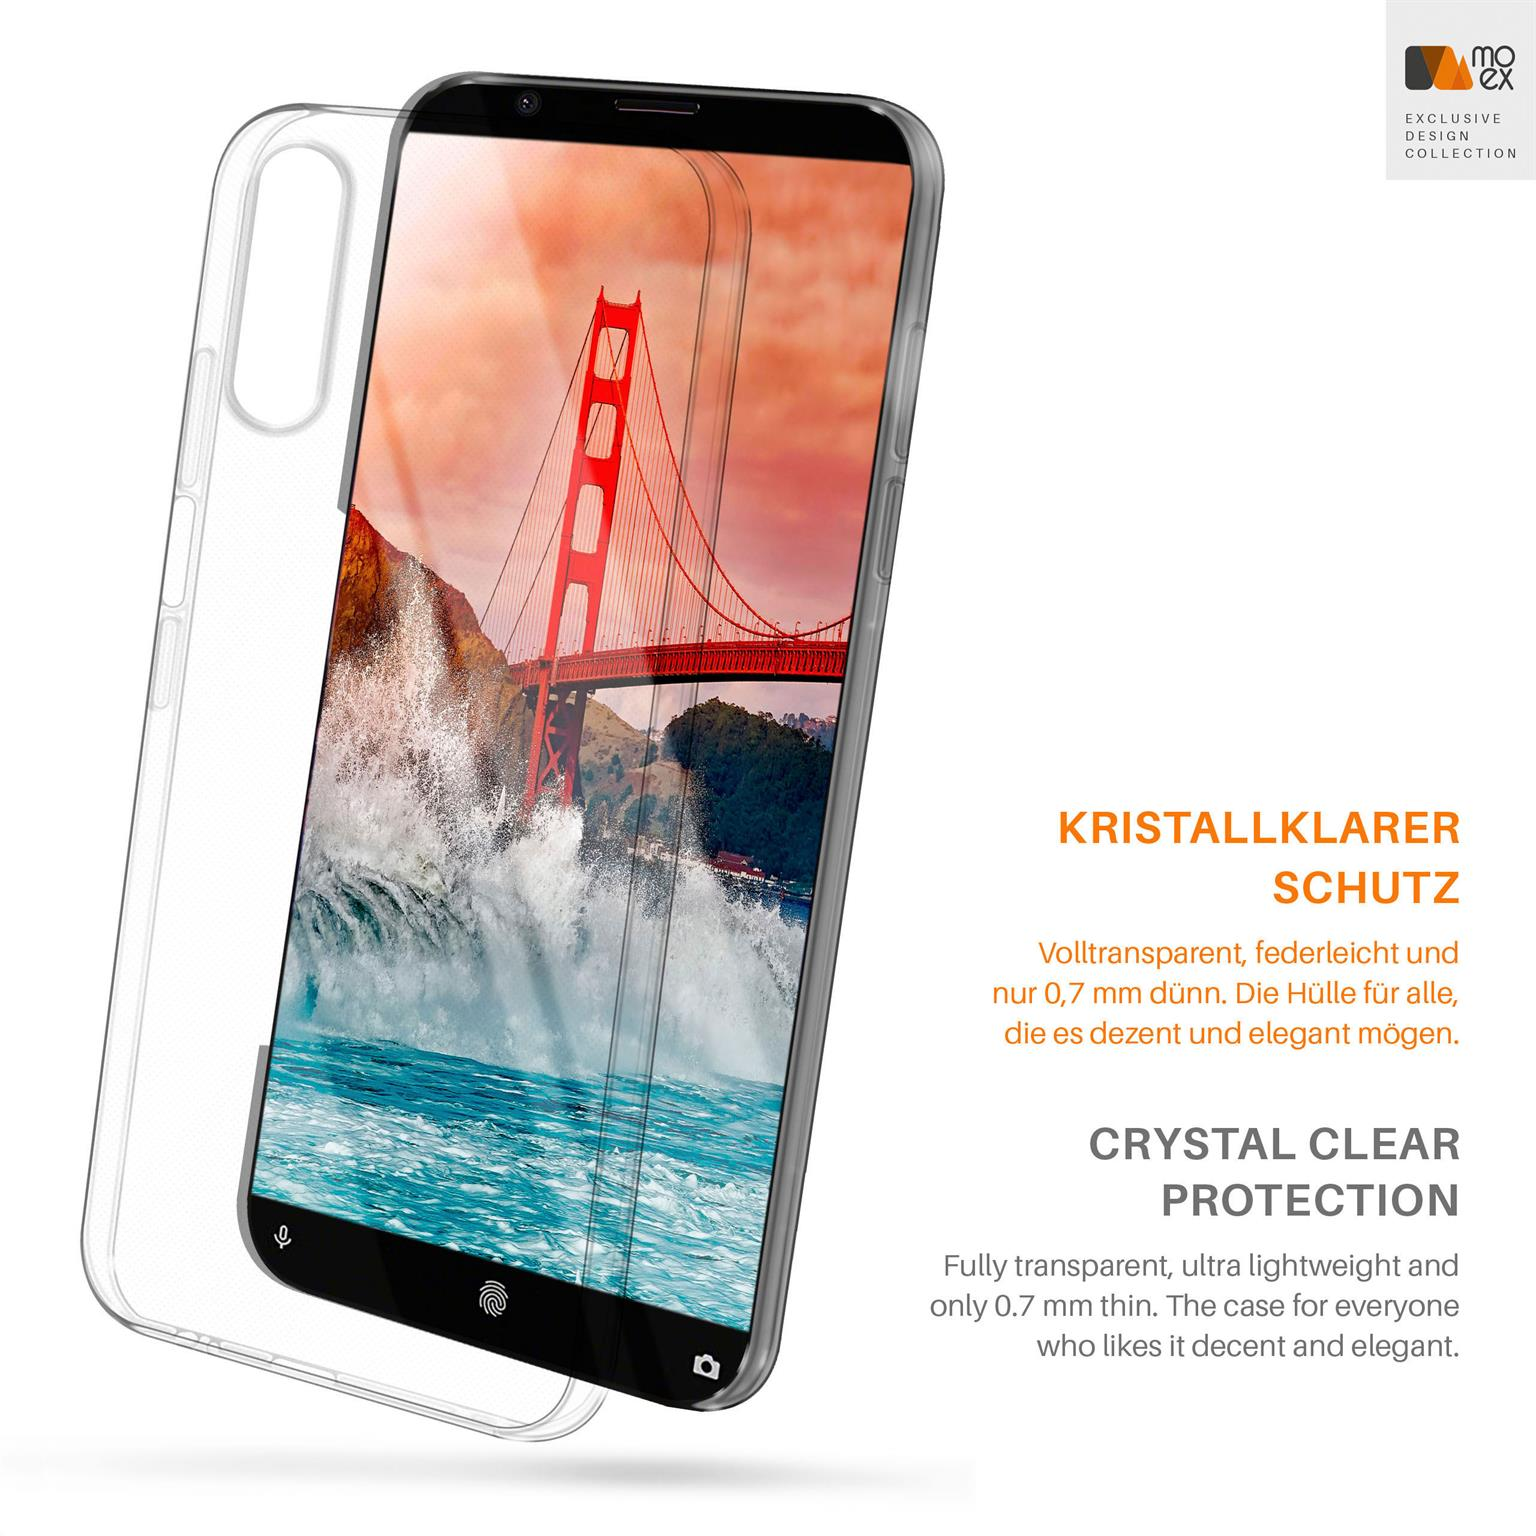 5, Case, Crystal-Clear Sony, Xperia Aero Backcover, MOEX